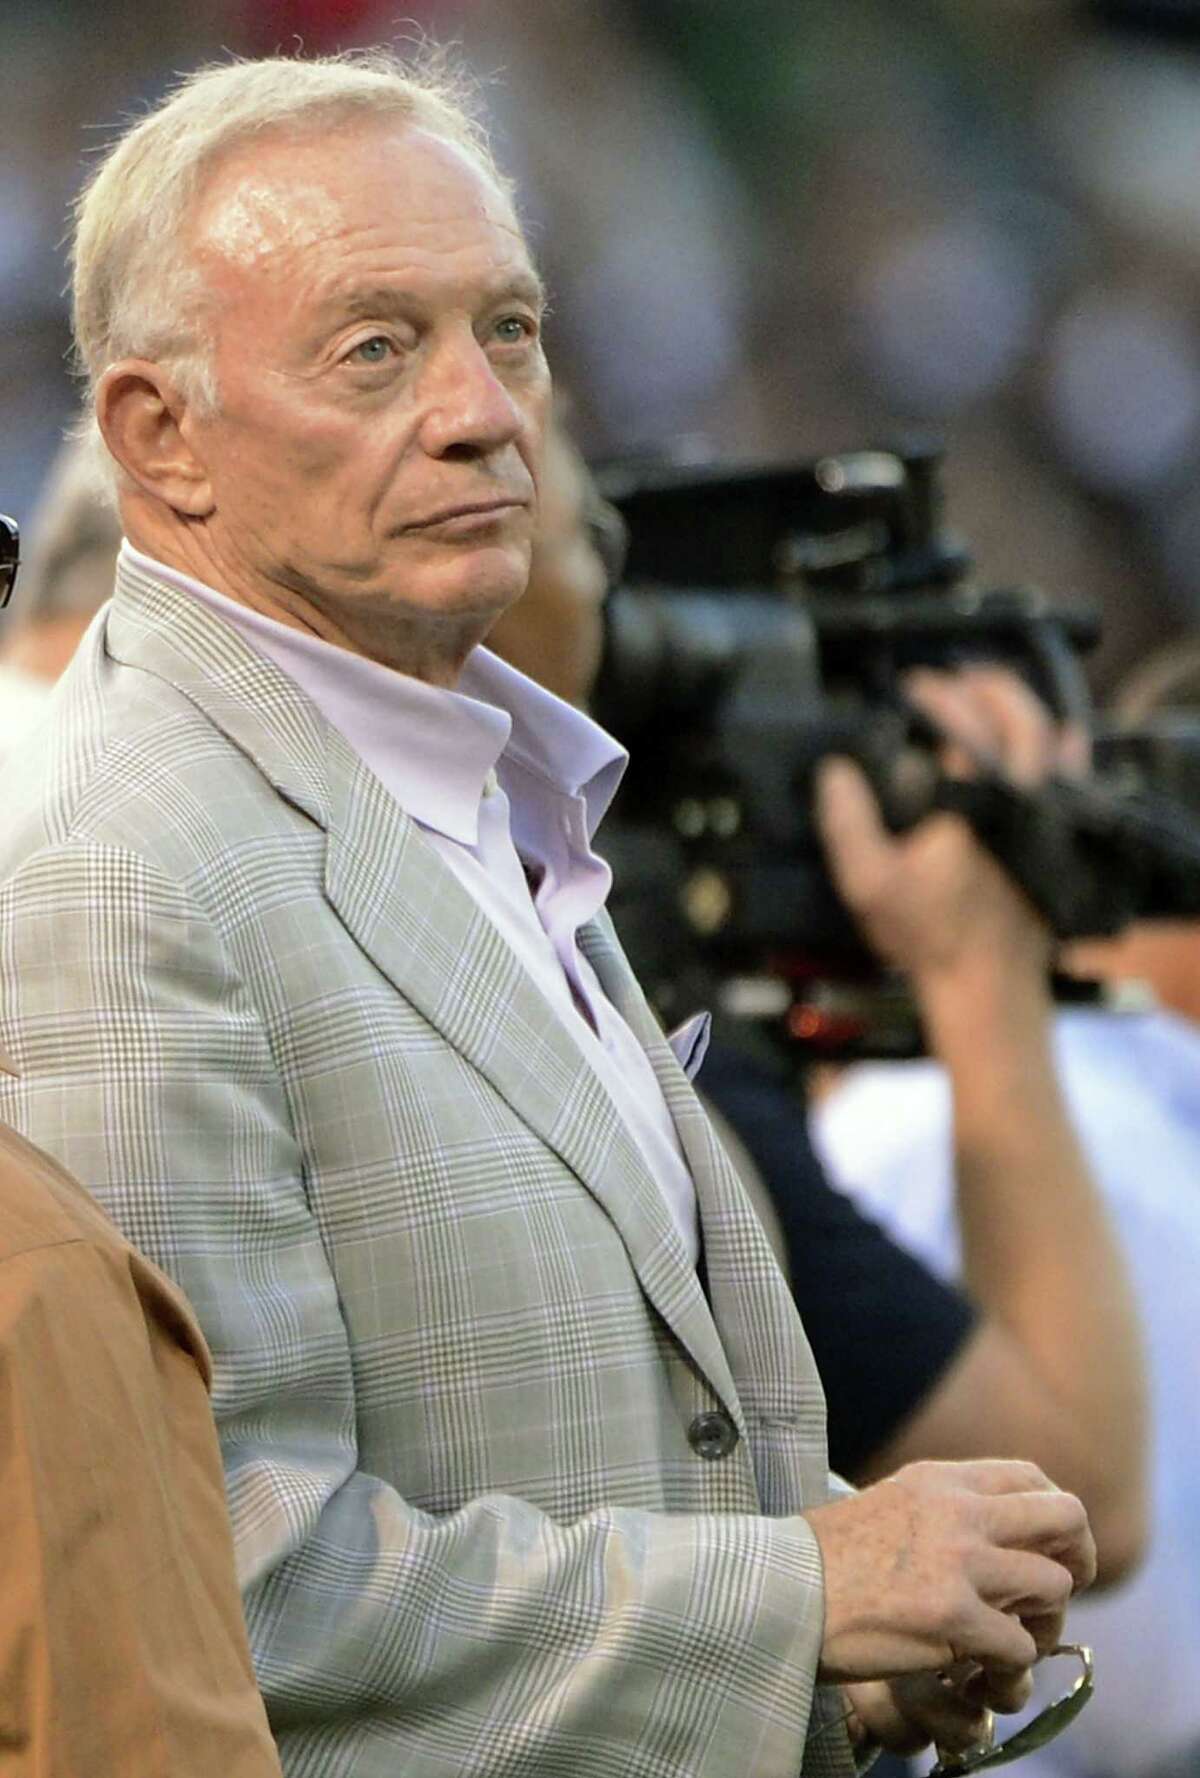 OAKLAND, CA - AUGUST 13: Owner Jerry Jones of the Dallas Cowboys looks on from the sidelines during an NFL pre-season football game against the Oakland Raiders at O.co Coliseum on August 13, 2012 in Oakland, California. The Cowboys won the game 3-0.